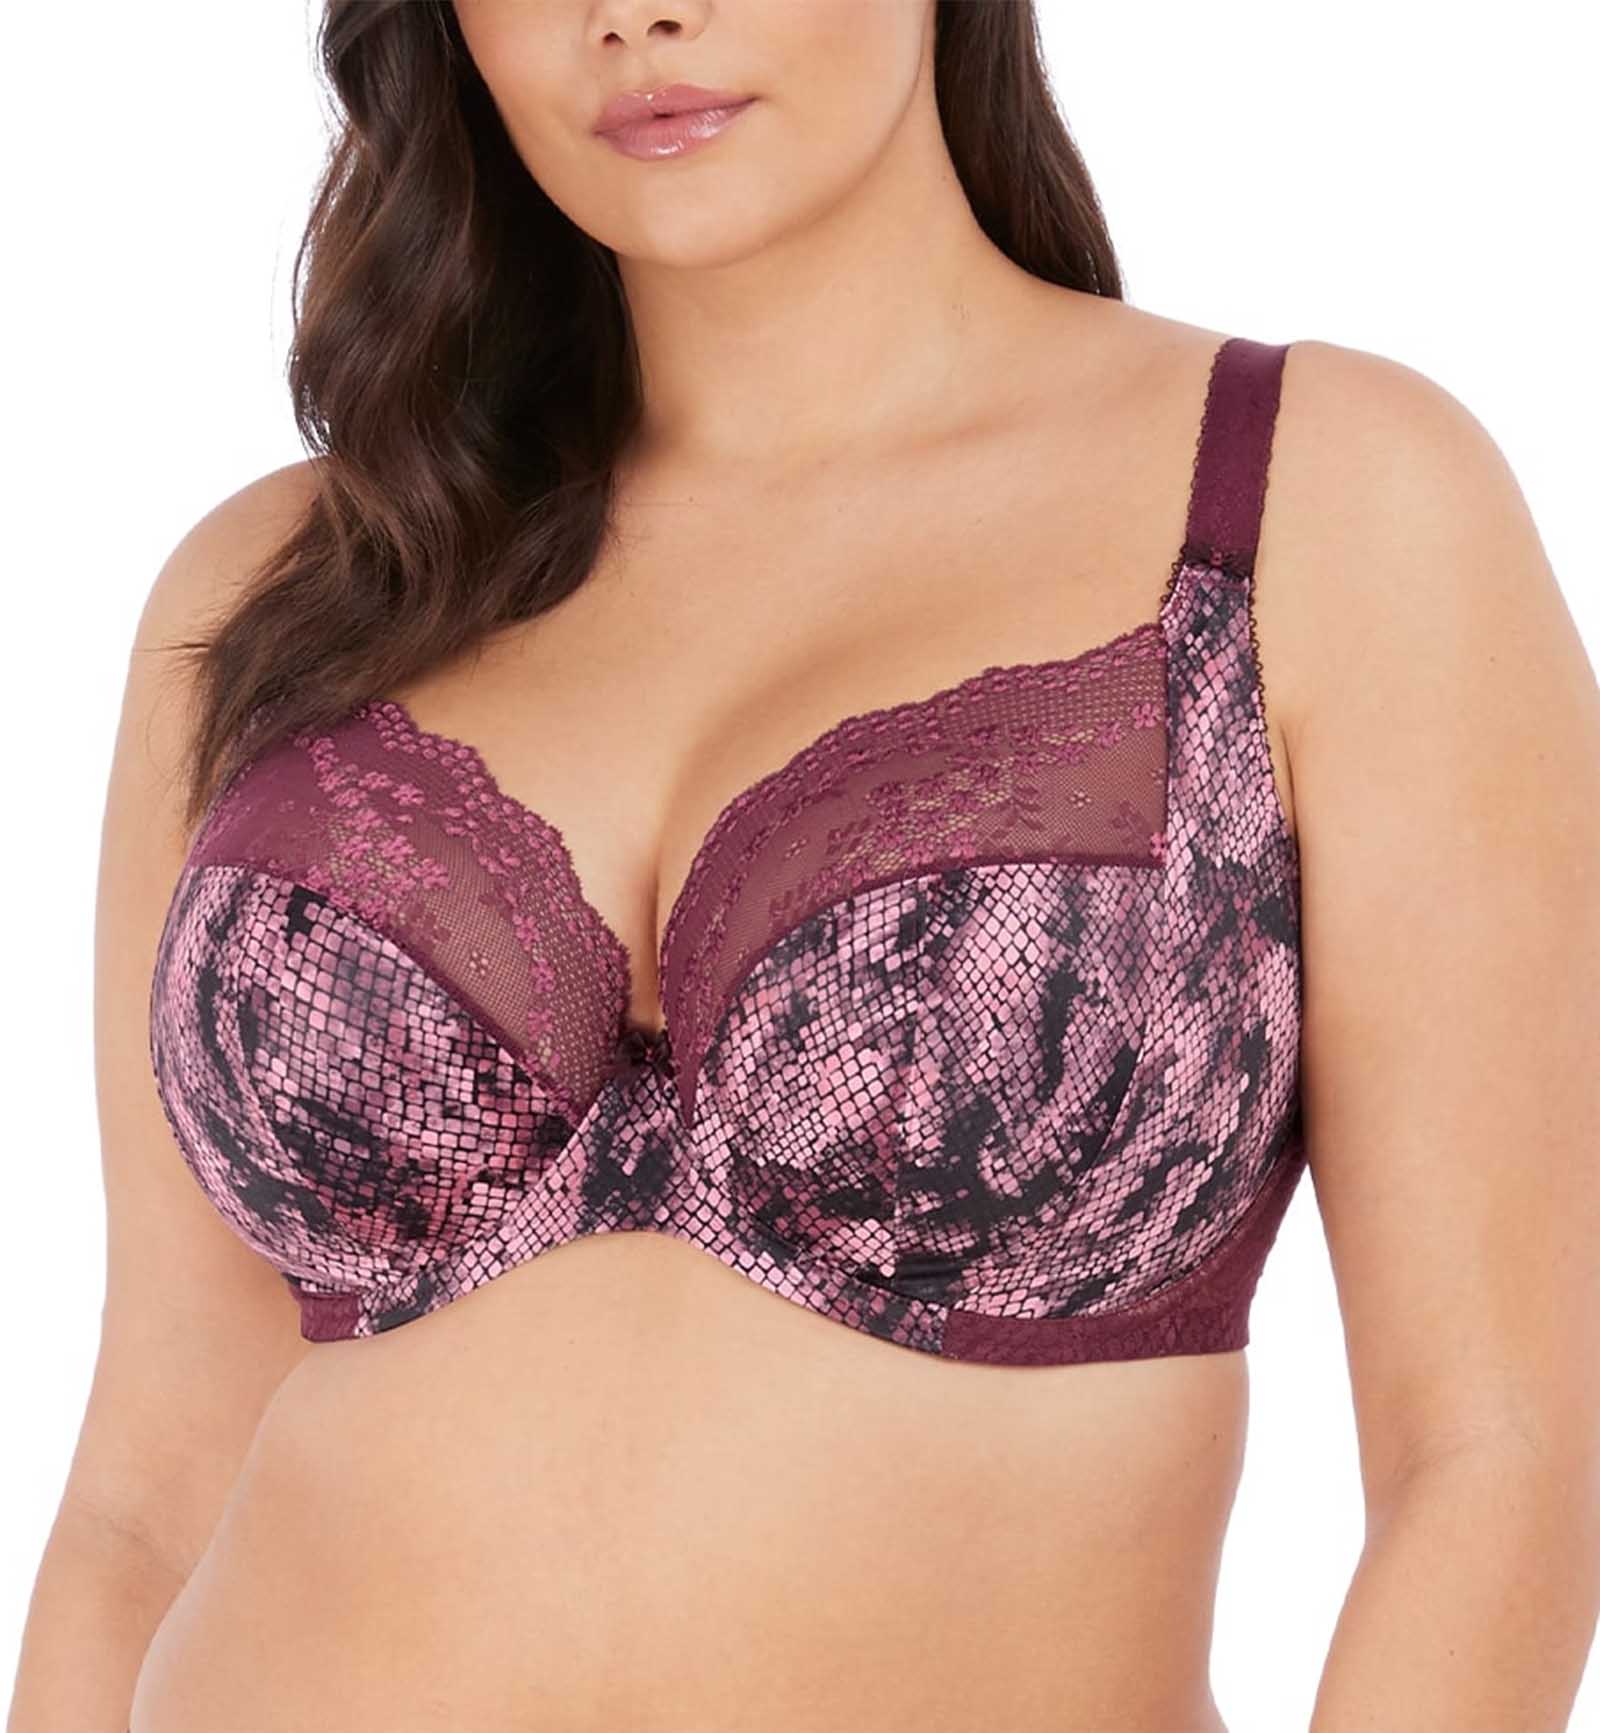 Elomi Lucie Banded Stretch Lace Plunge Underwire Bra (4490),32GG,Mambo - Mambo,32GG